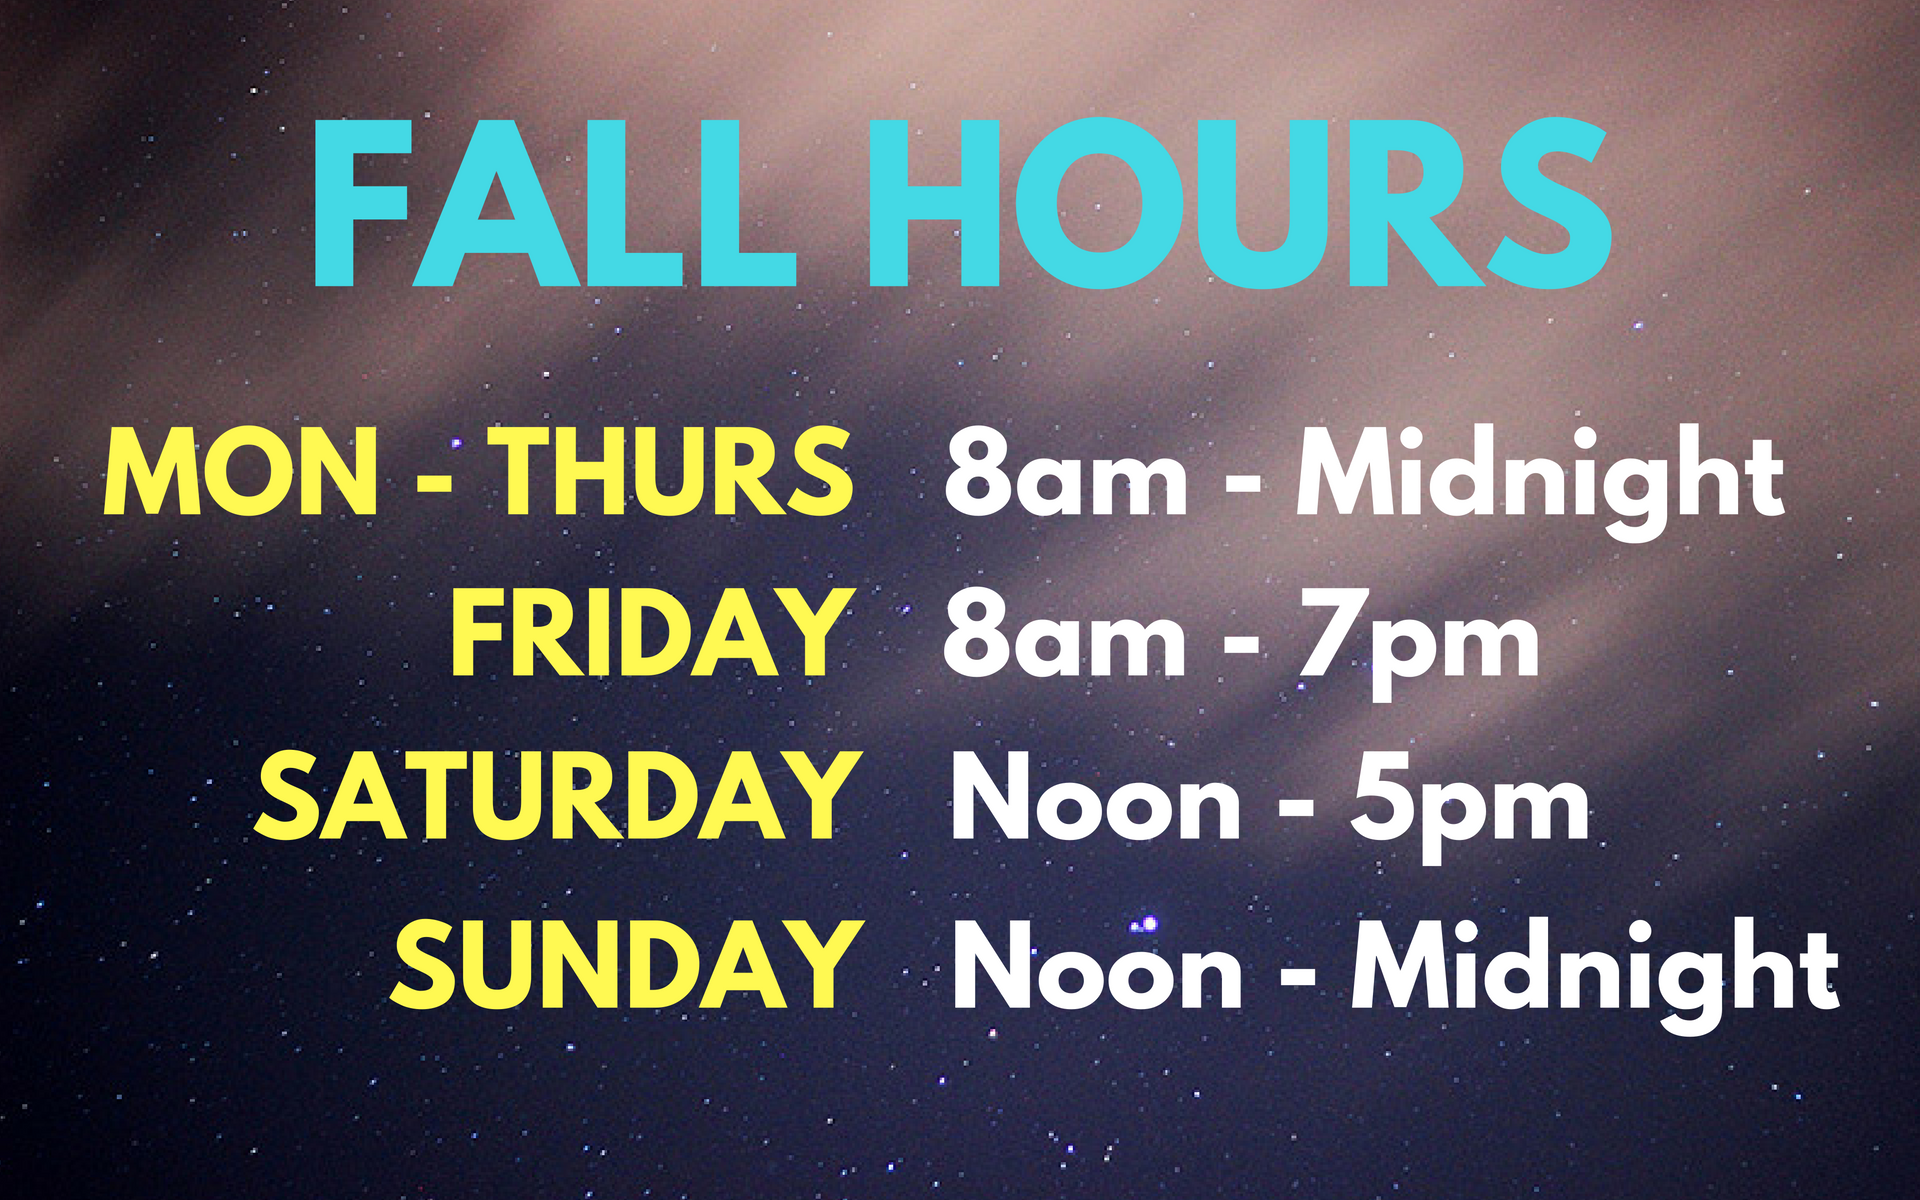 Fall Hours.  Mon - thurs: 8am-midnight, Friday: 8am-7pm, Saturday: Noon - 5pm, Sunday: Noon - midnight